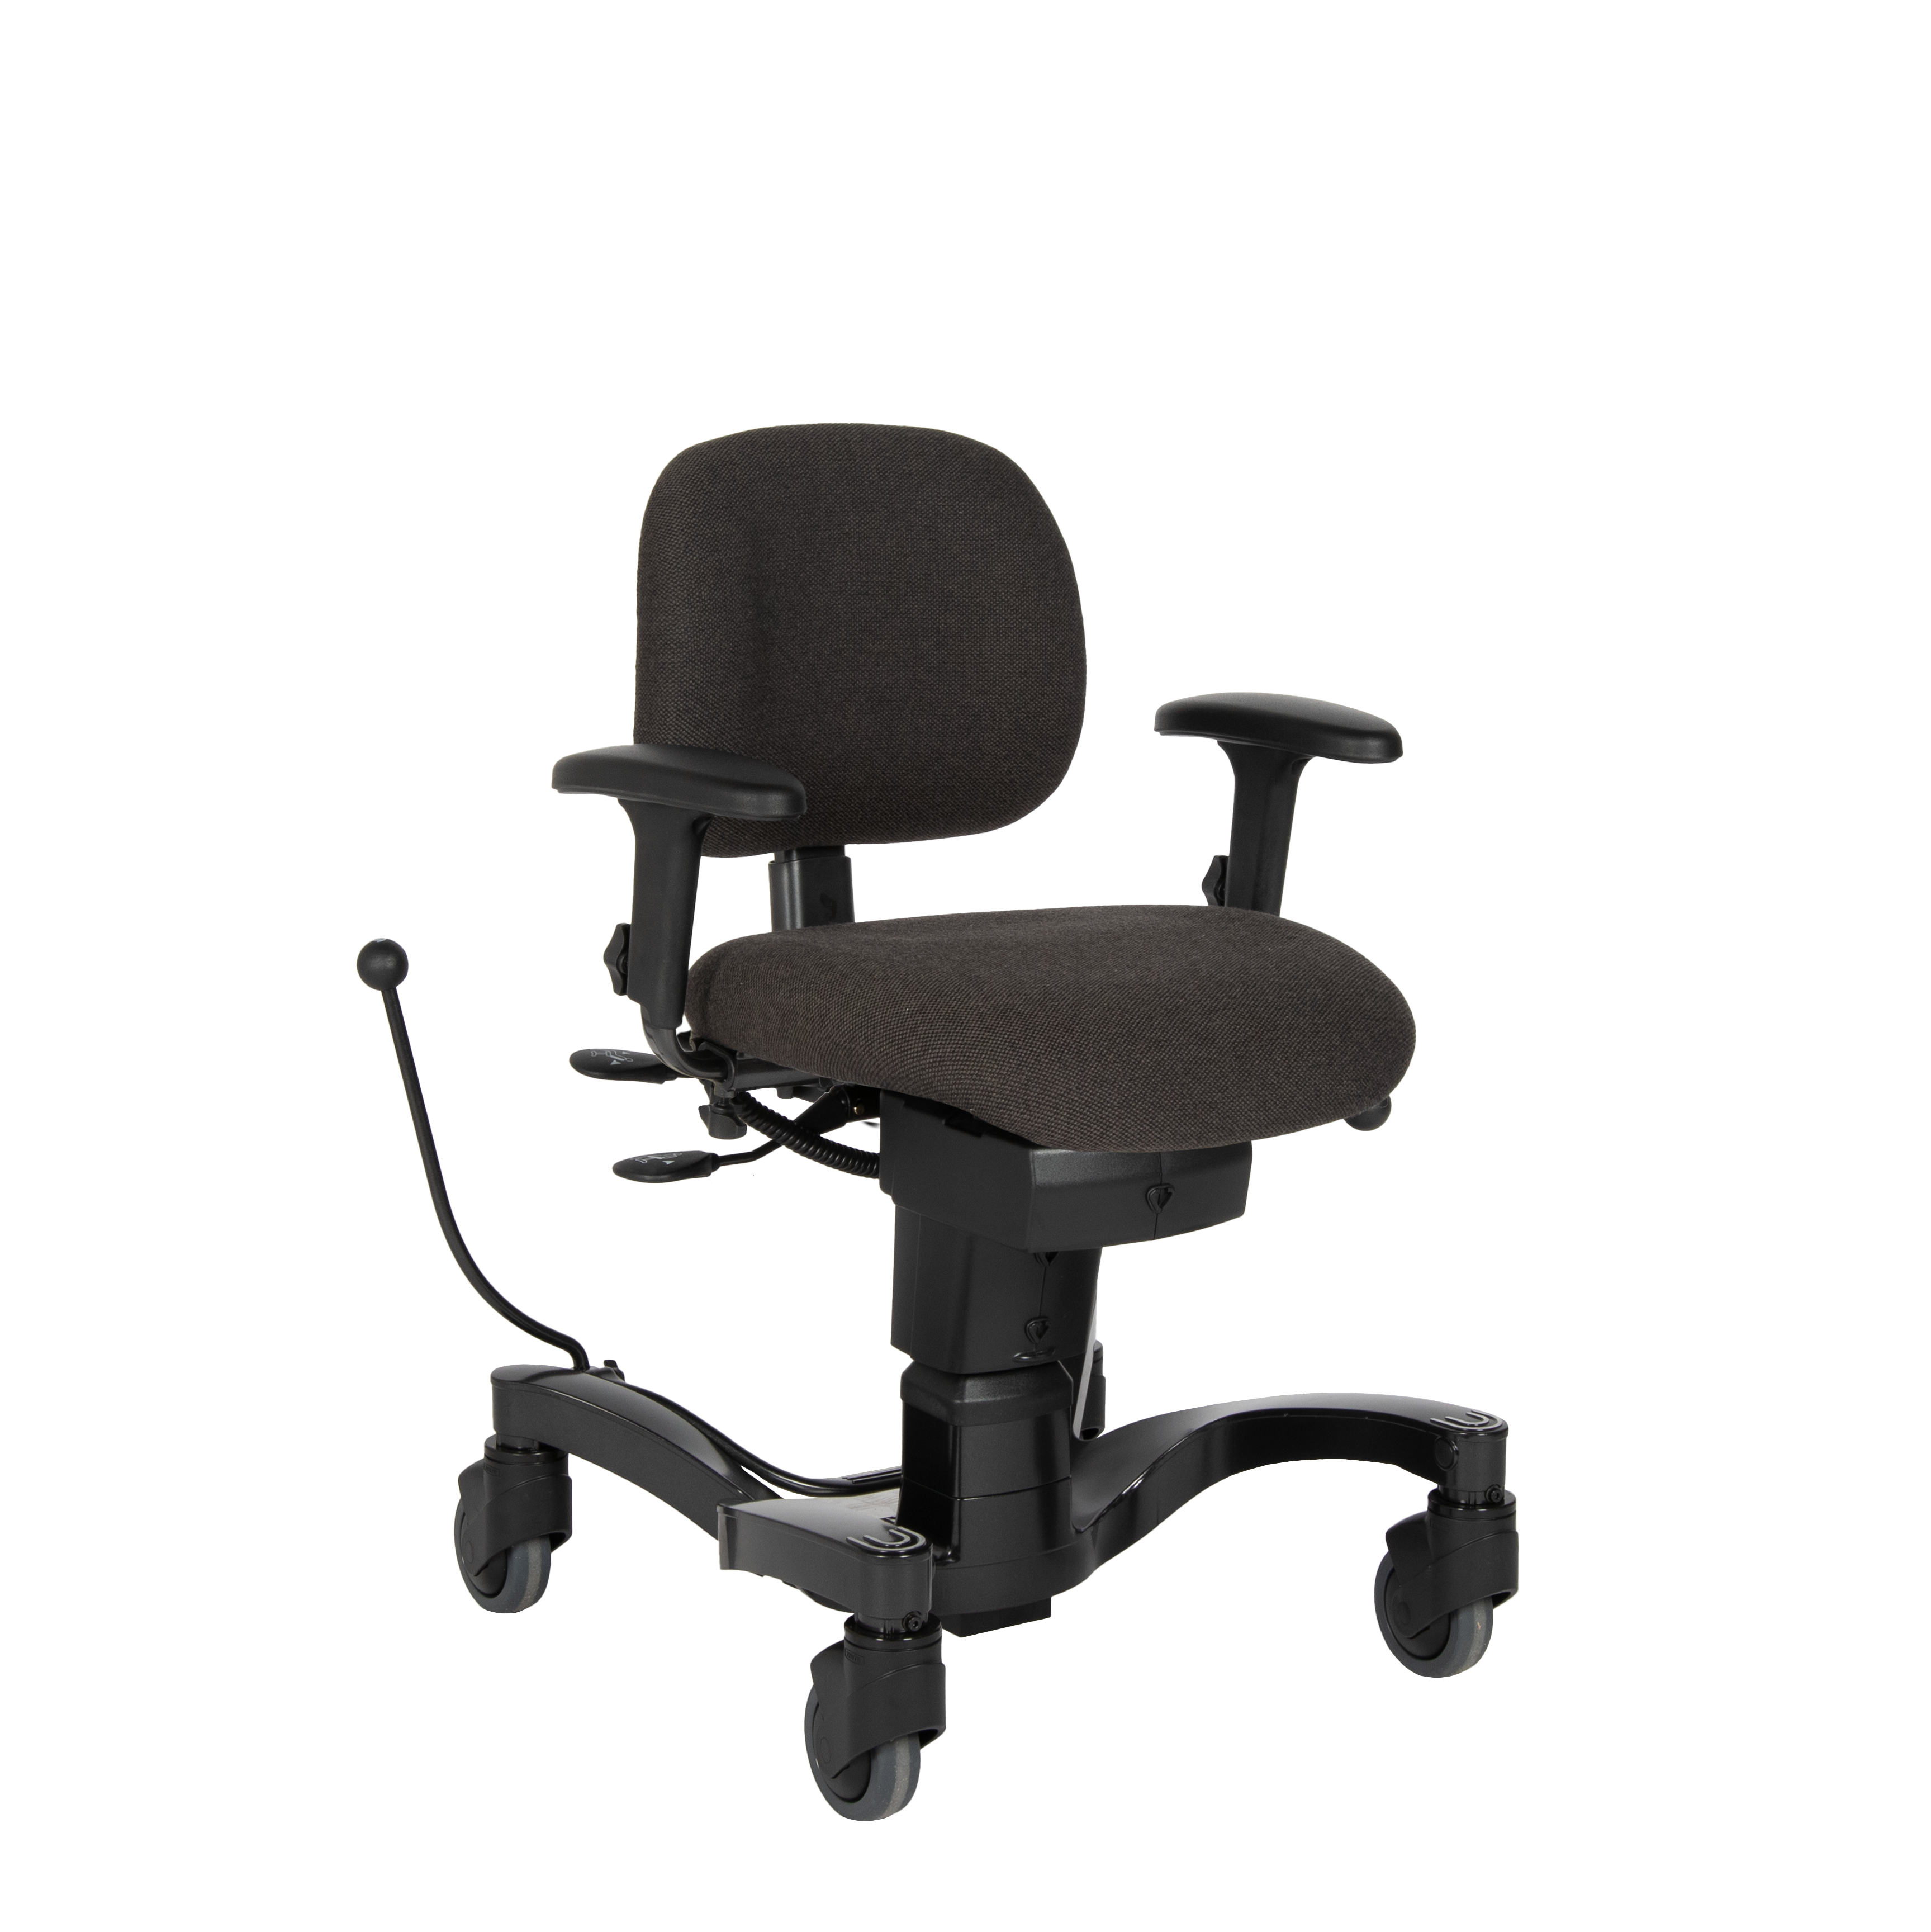 Front right view of Vela 700 independence chair in black.